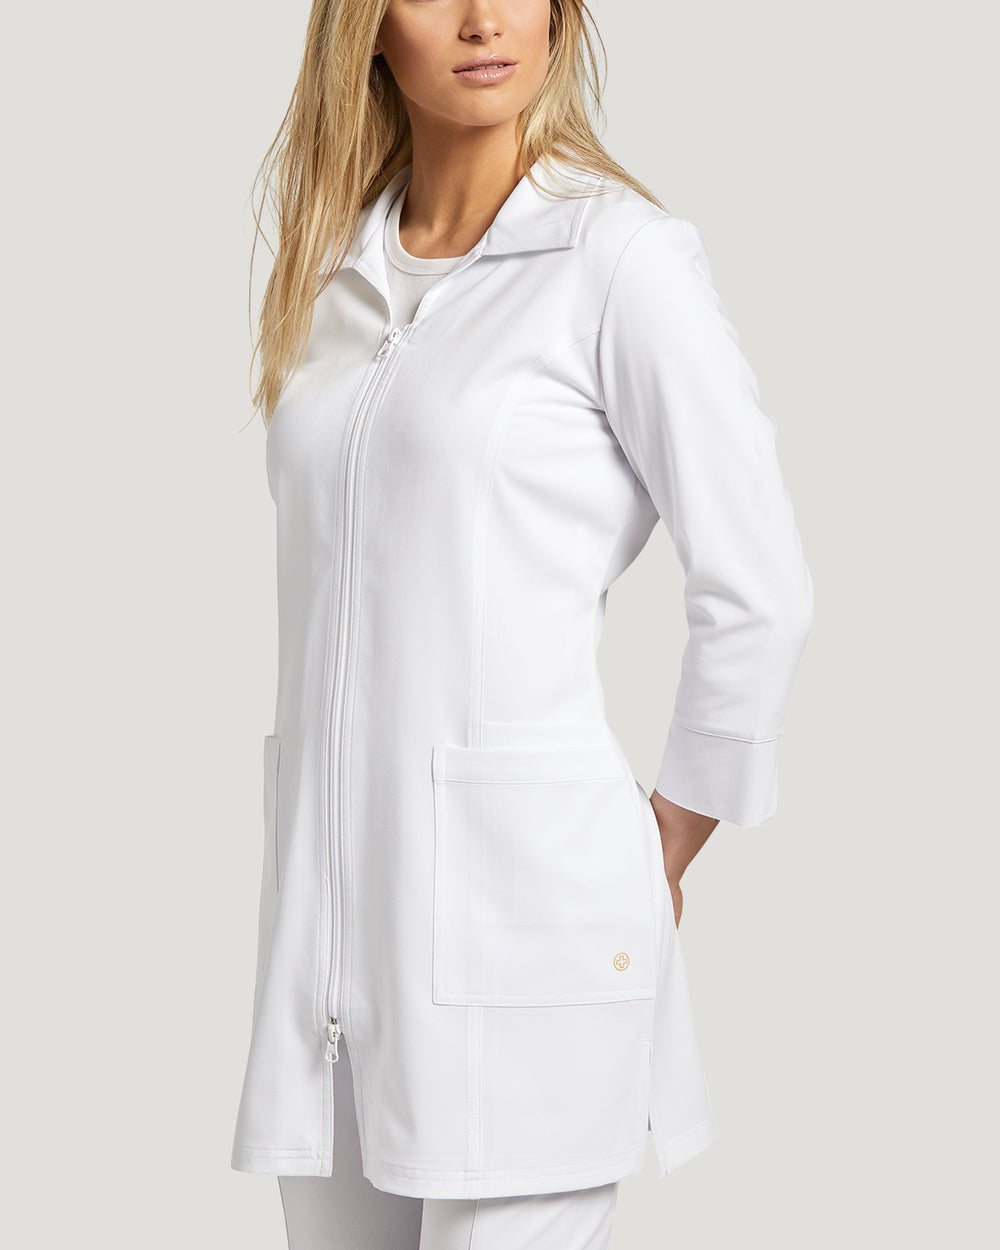 2817 White Cross Soft Marvella Lab coat with Side and Small Inner Pock ...